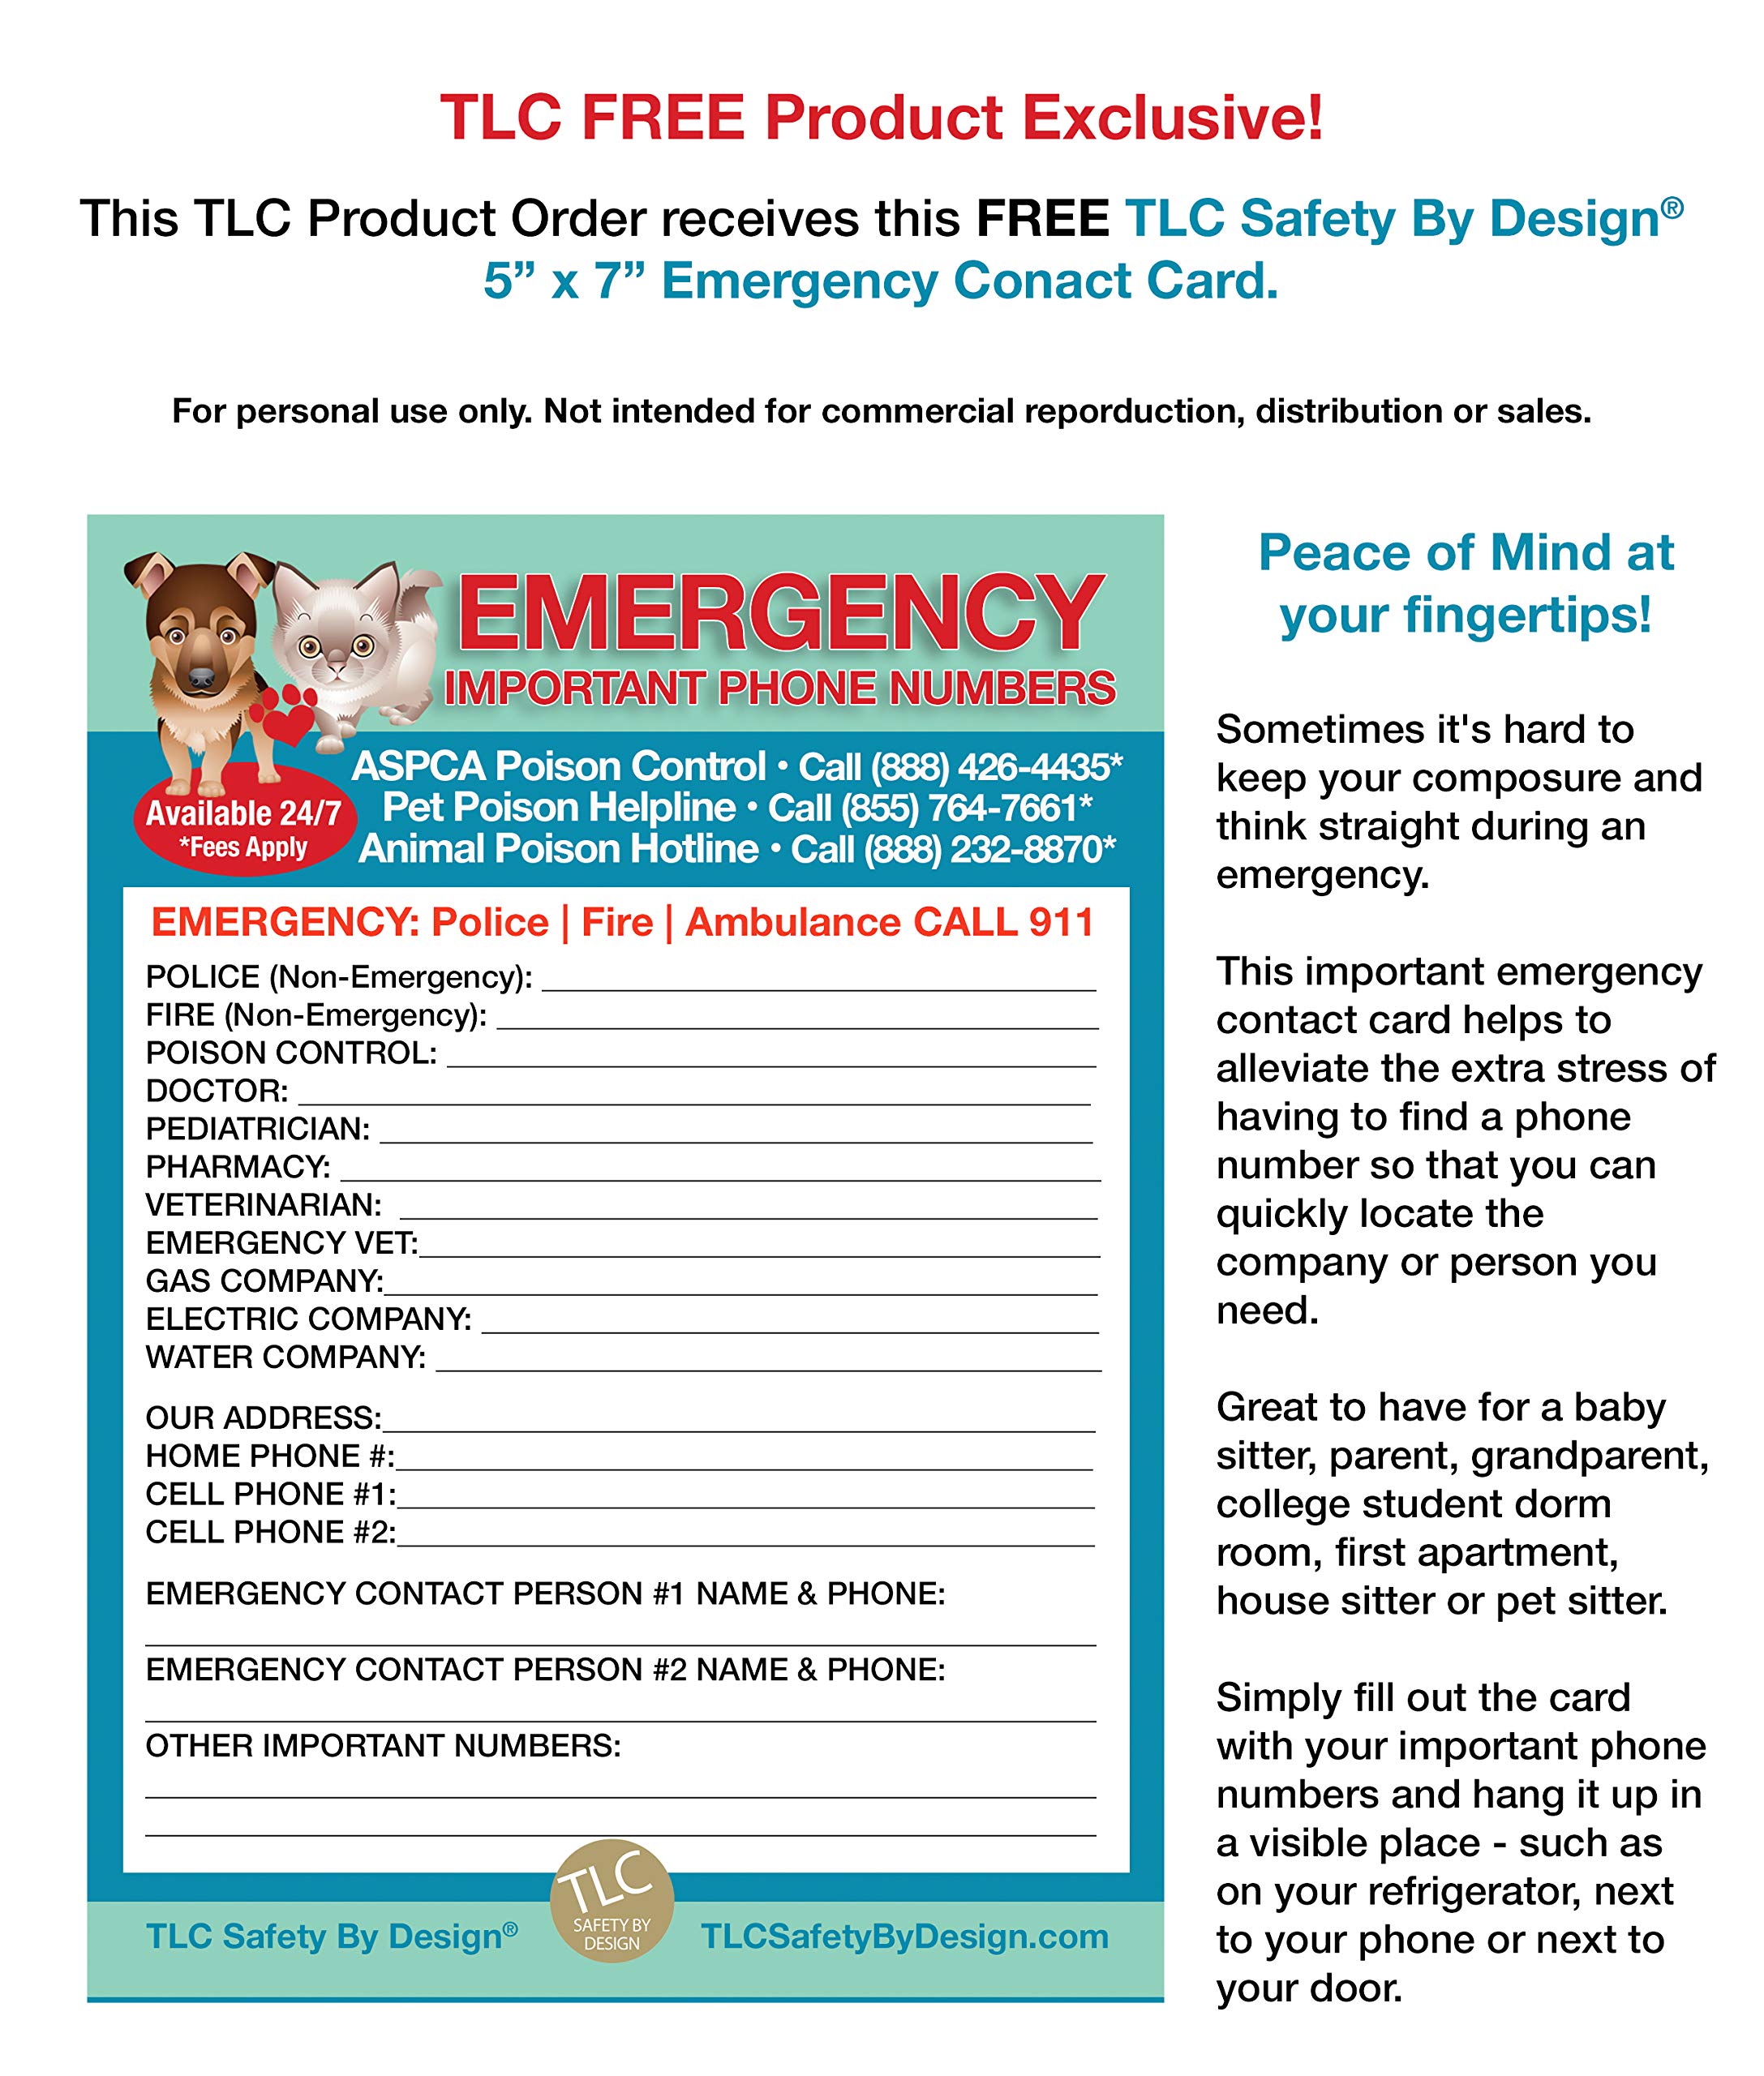 TLC Safety By Design Premium Toxic and Safe Plants & Flowers Poison for Pets Dogs Cats Emergency Large Format Veterinarian Approved Refrigerator Safety Magnet 8.5” x 11”